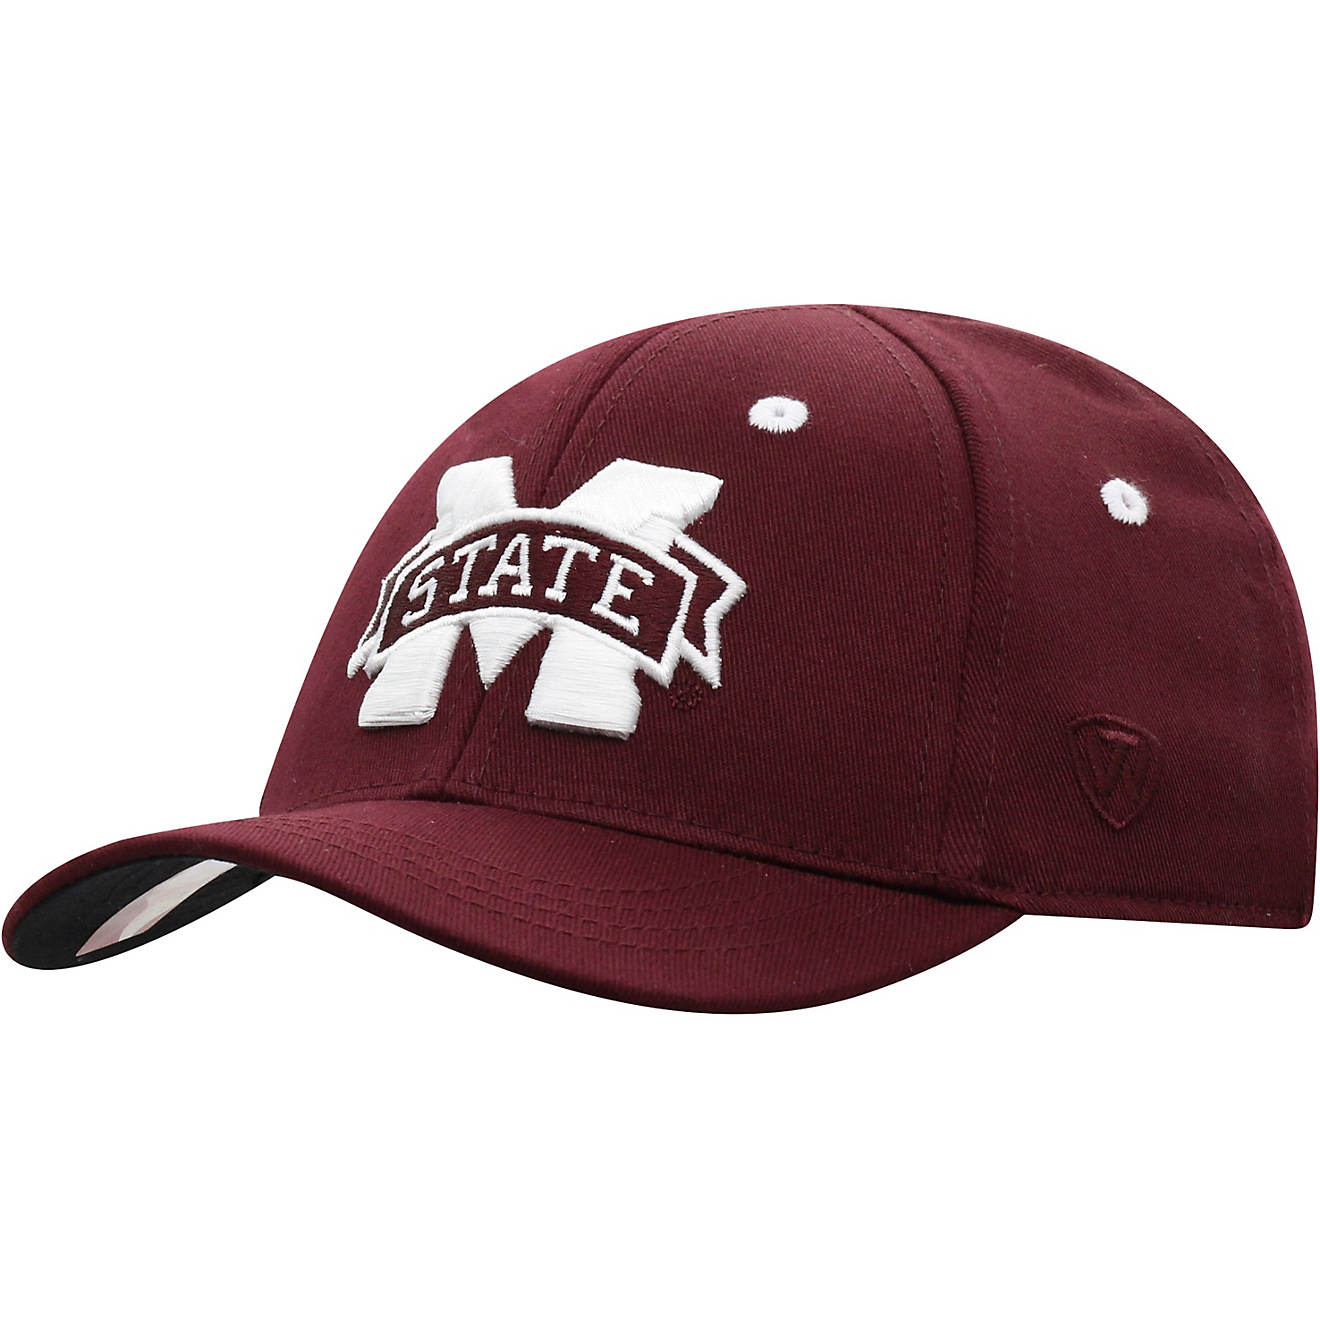 Top of the World Infants' Mississippi State University Cub Cap                                                                   - view number 1